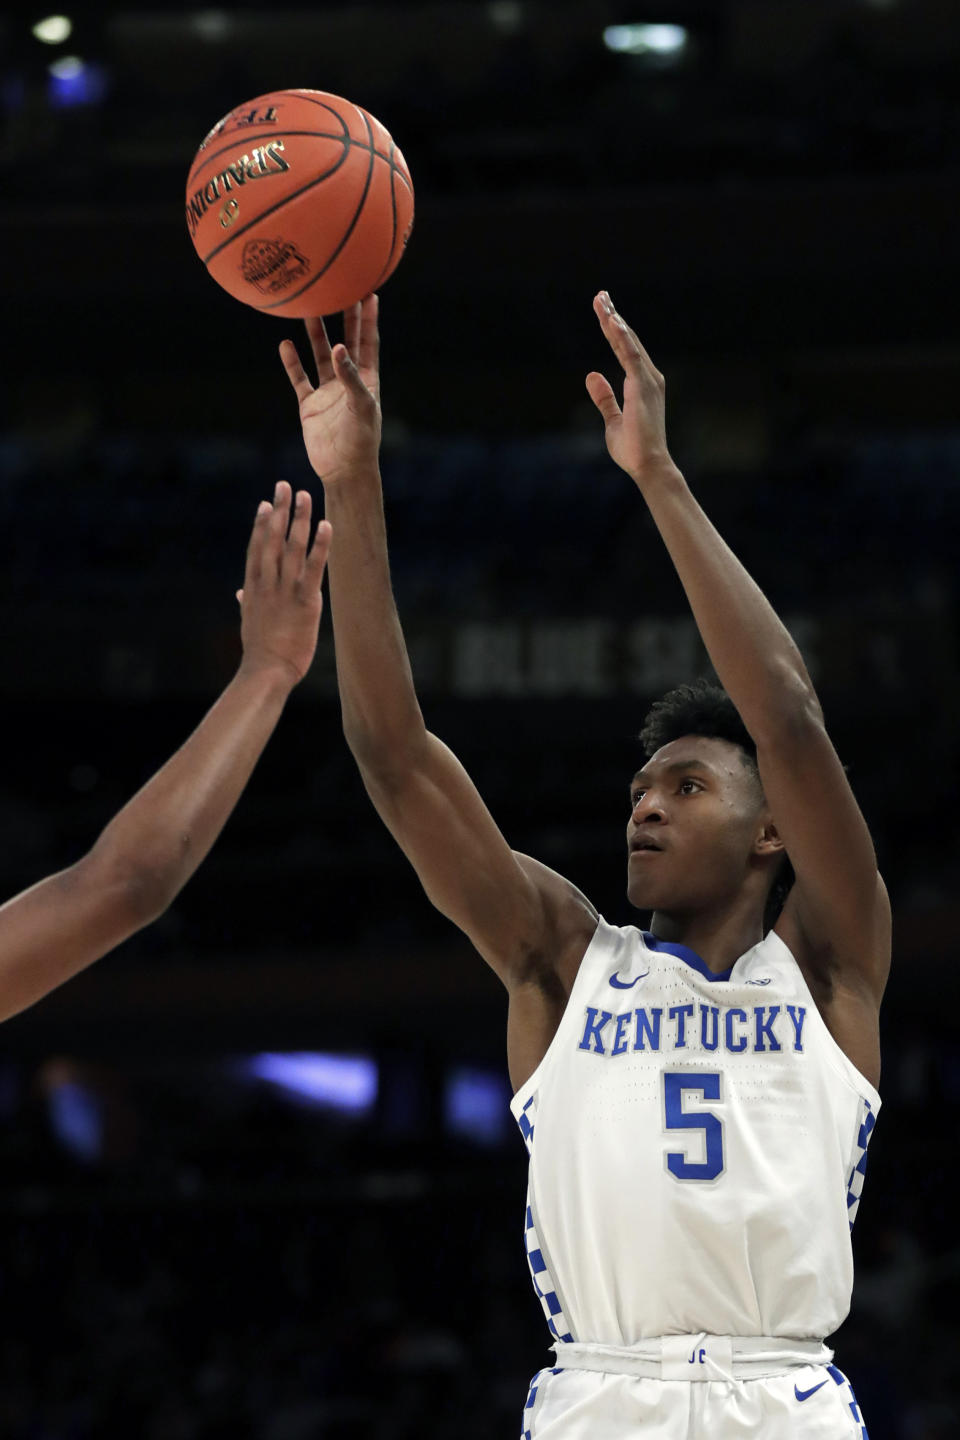 Kentucky guard Immanuel Quickley (5) shoots against Michigan State during the second half of an NCAA college basketball game Tuesday, Nov. 5, 2019, in New York. Kentucky won 69-62. (AP Photo/Adam Hunger)